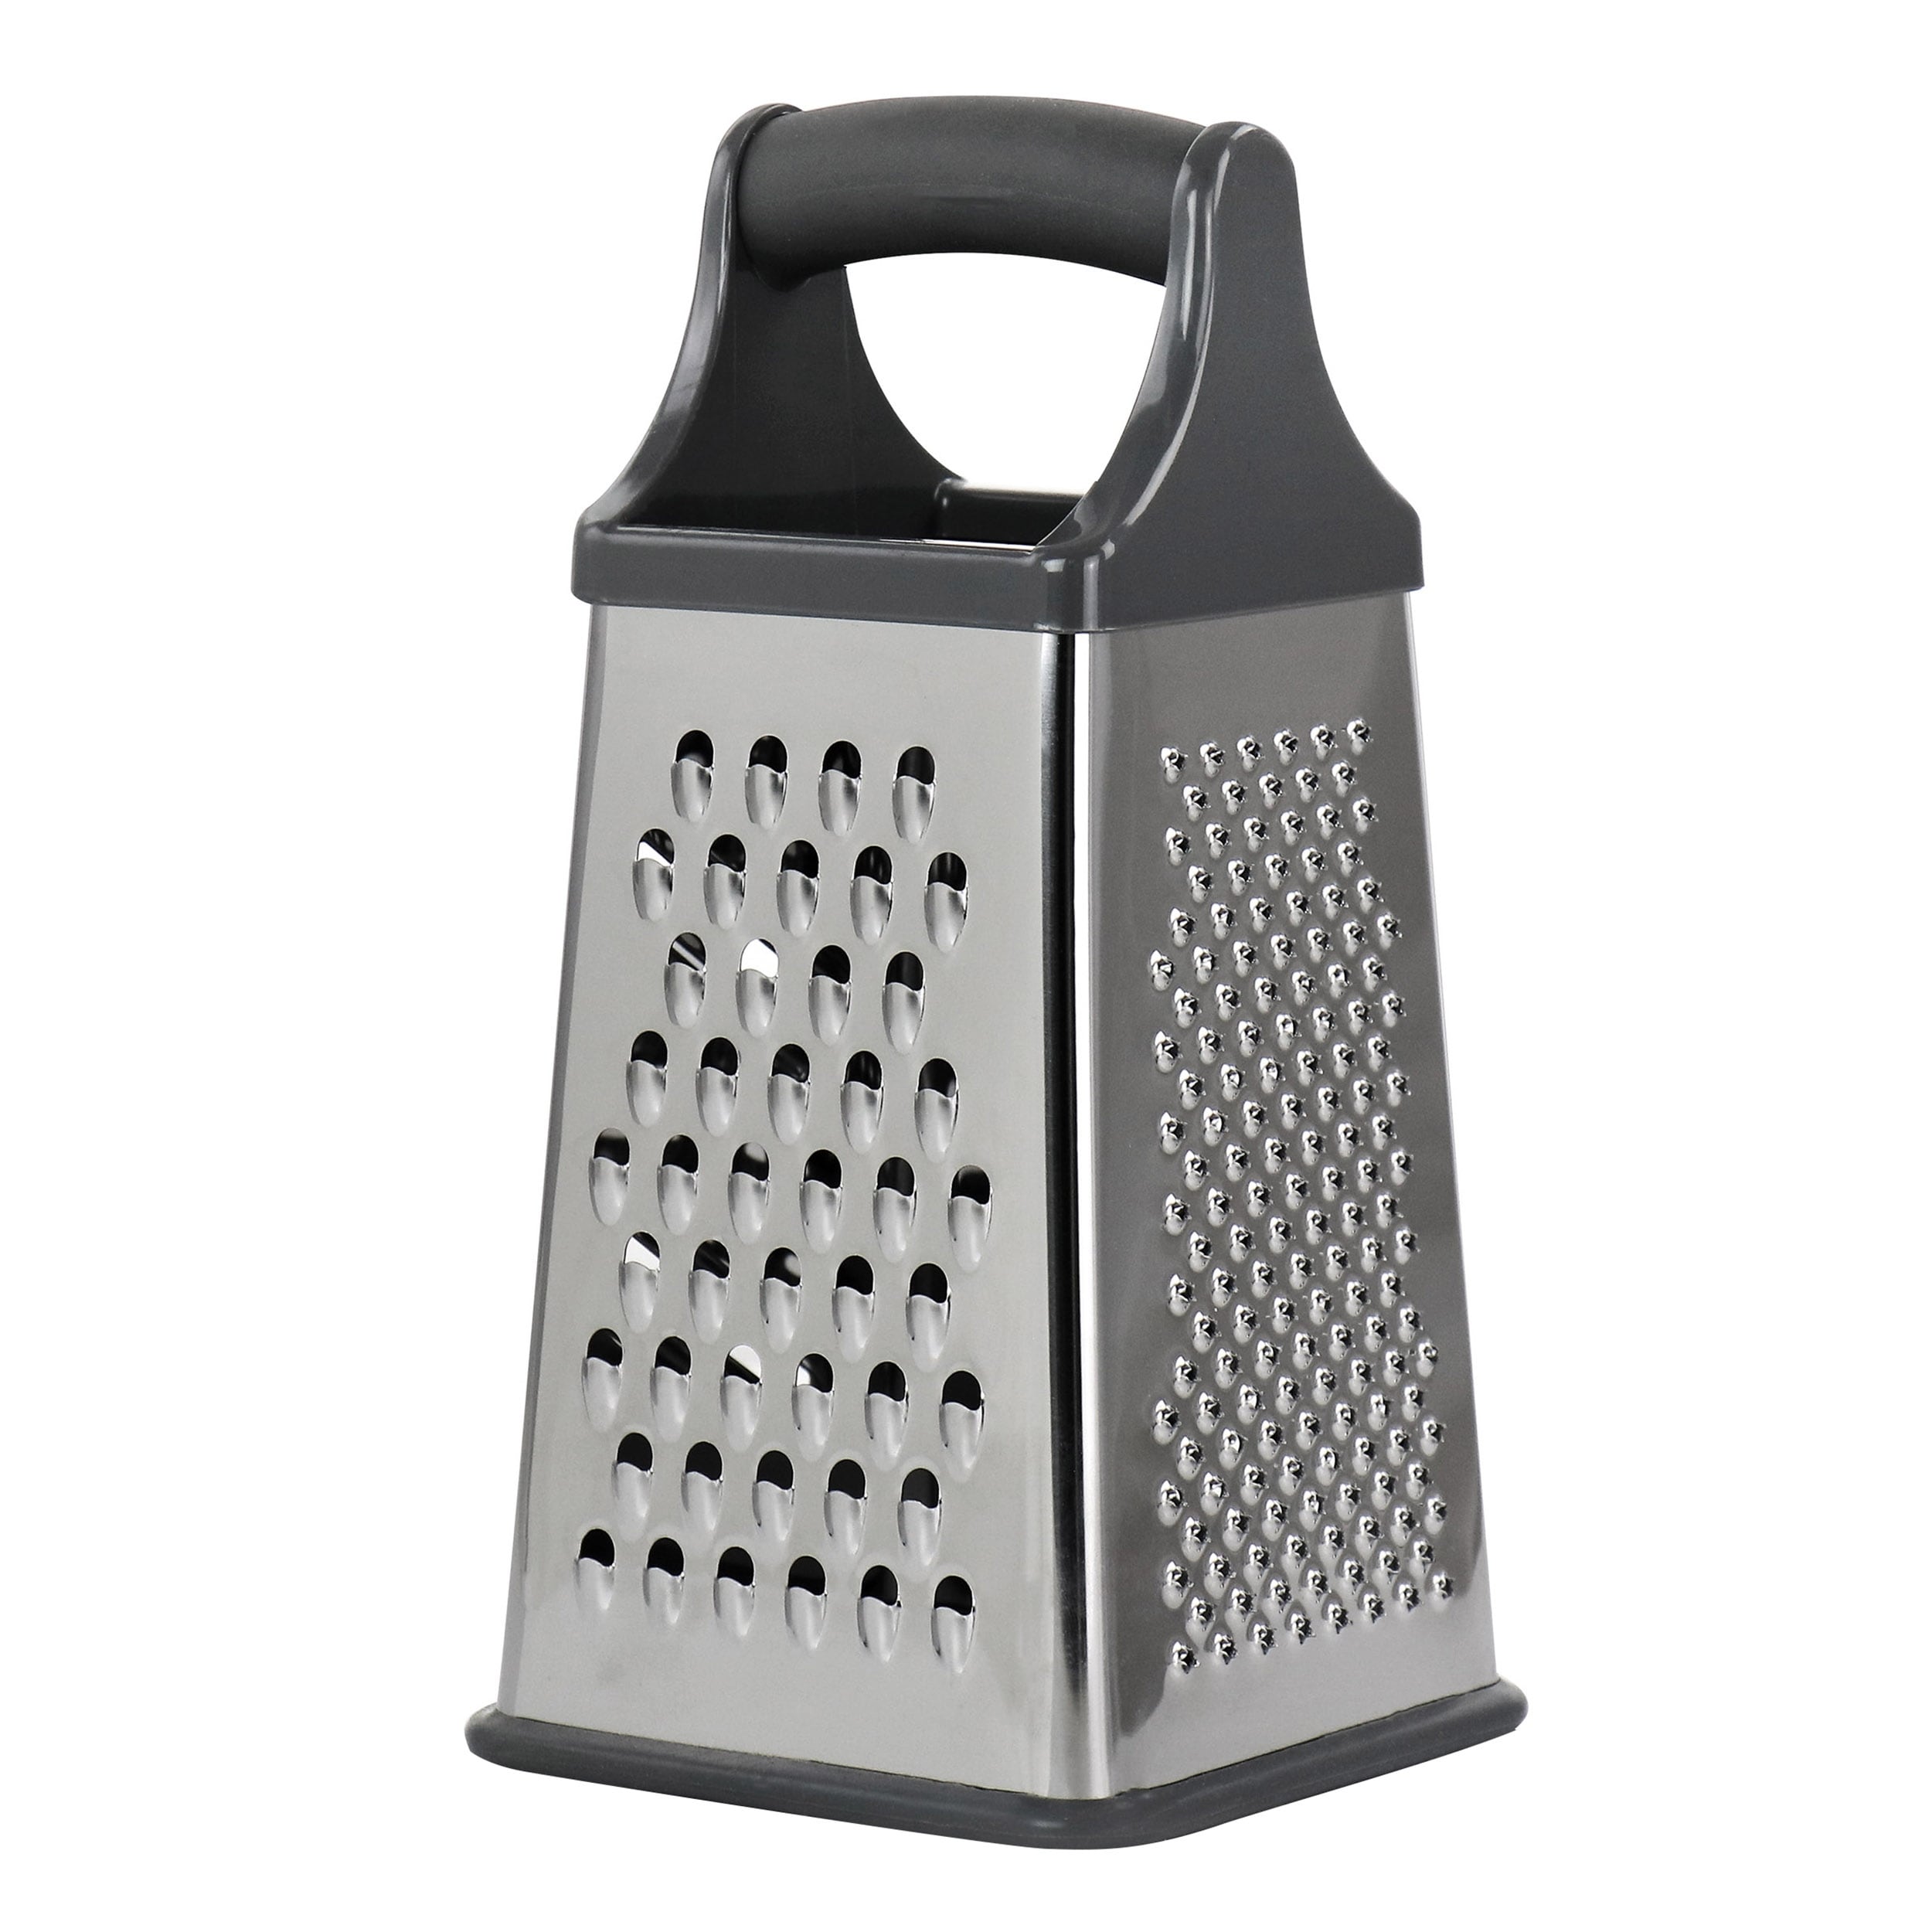 https://ak1.ostkcdn.com/images/products/is/images/direct/1d62950448a368c241953fa655ecd469a735ec8a/Oster-Stainless-Steel-Four-Sided-Box-Grater.jpg